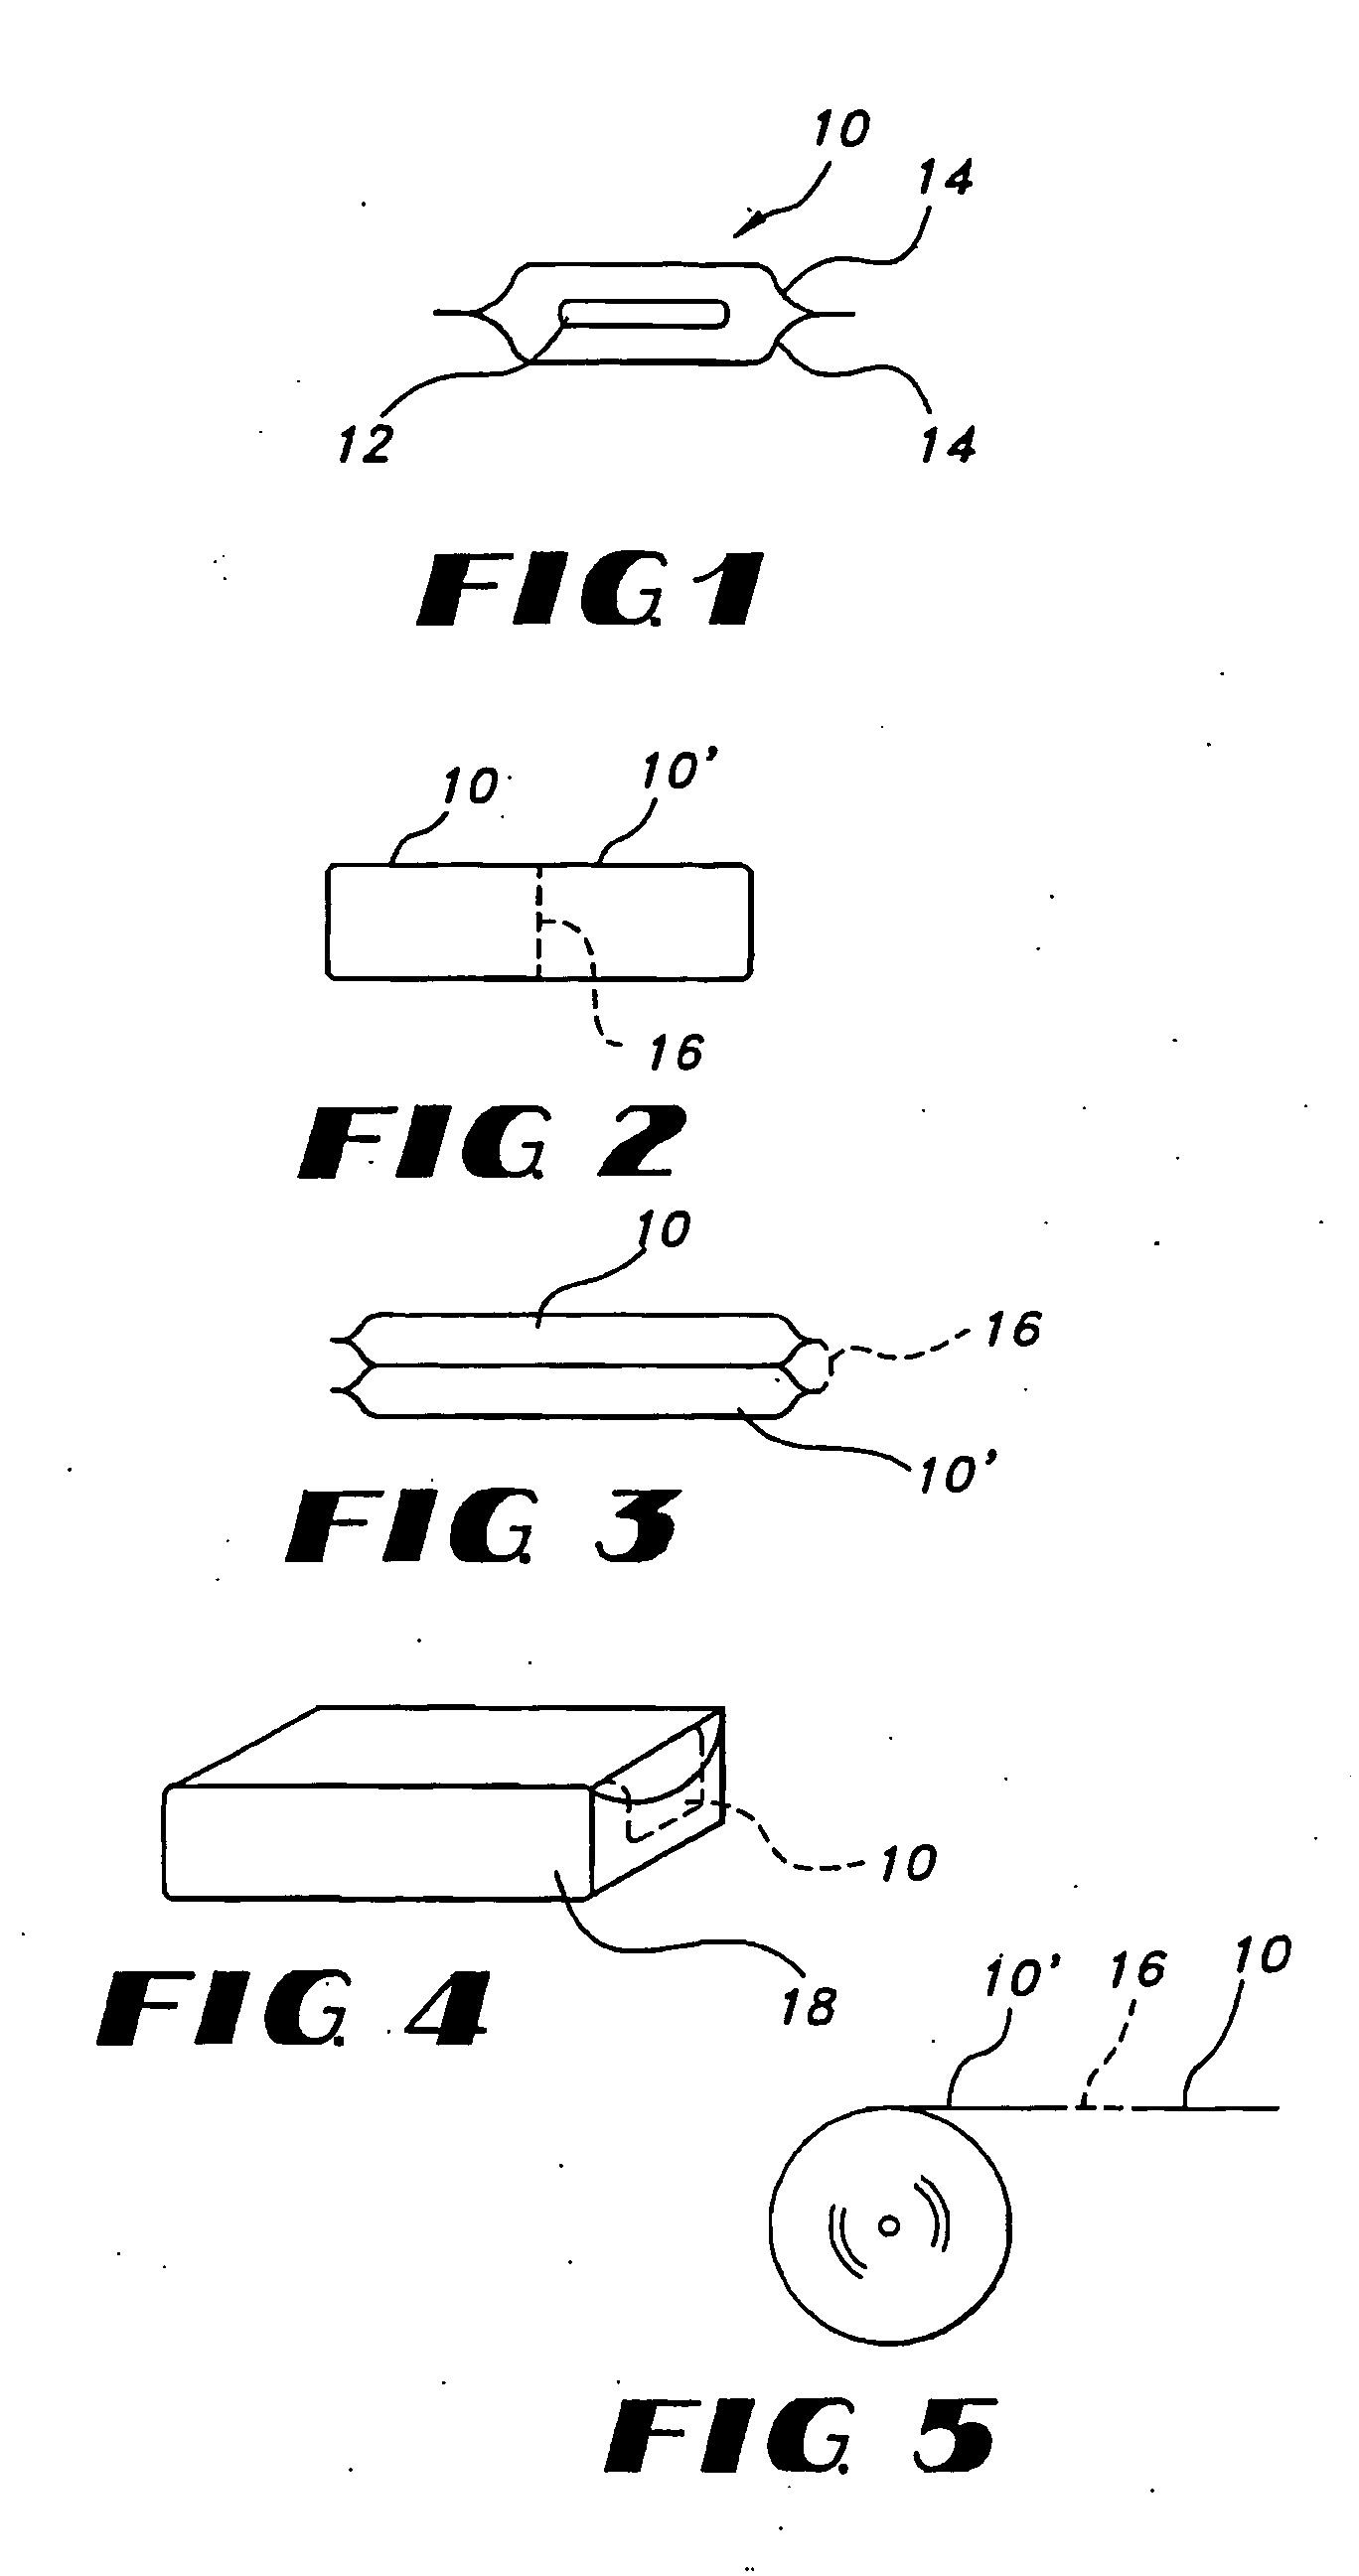 Uniform films for rapid-dissolve dosage form incorporating anti-tacking compositions